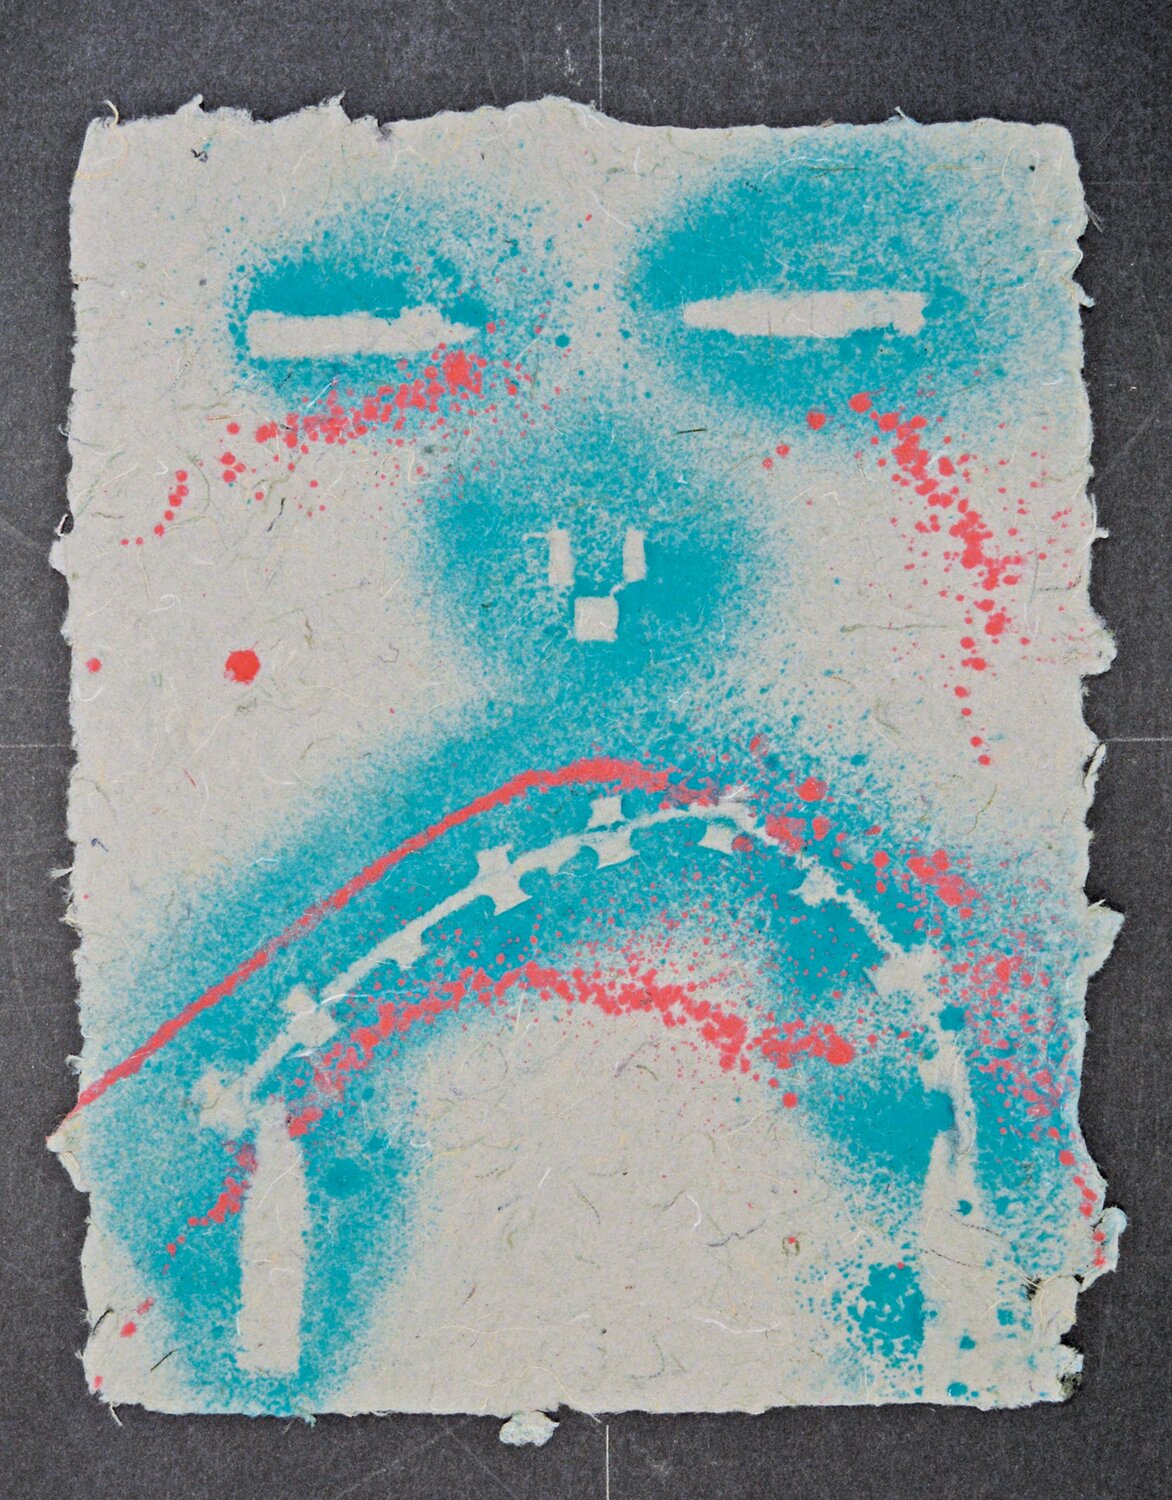 “Frown Face,” pulp print by Nathan Lewis, 2014.